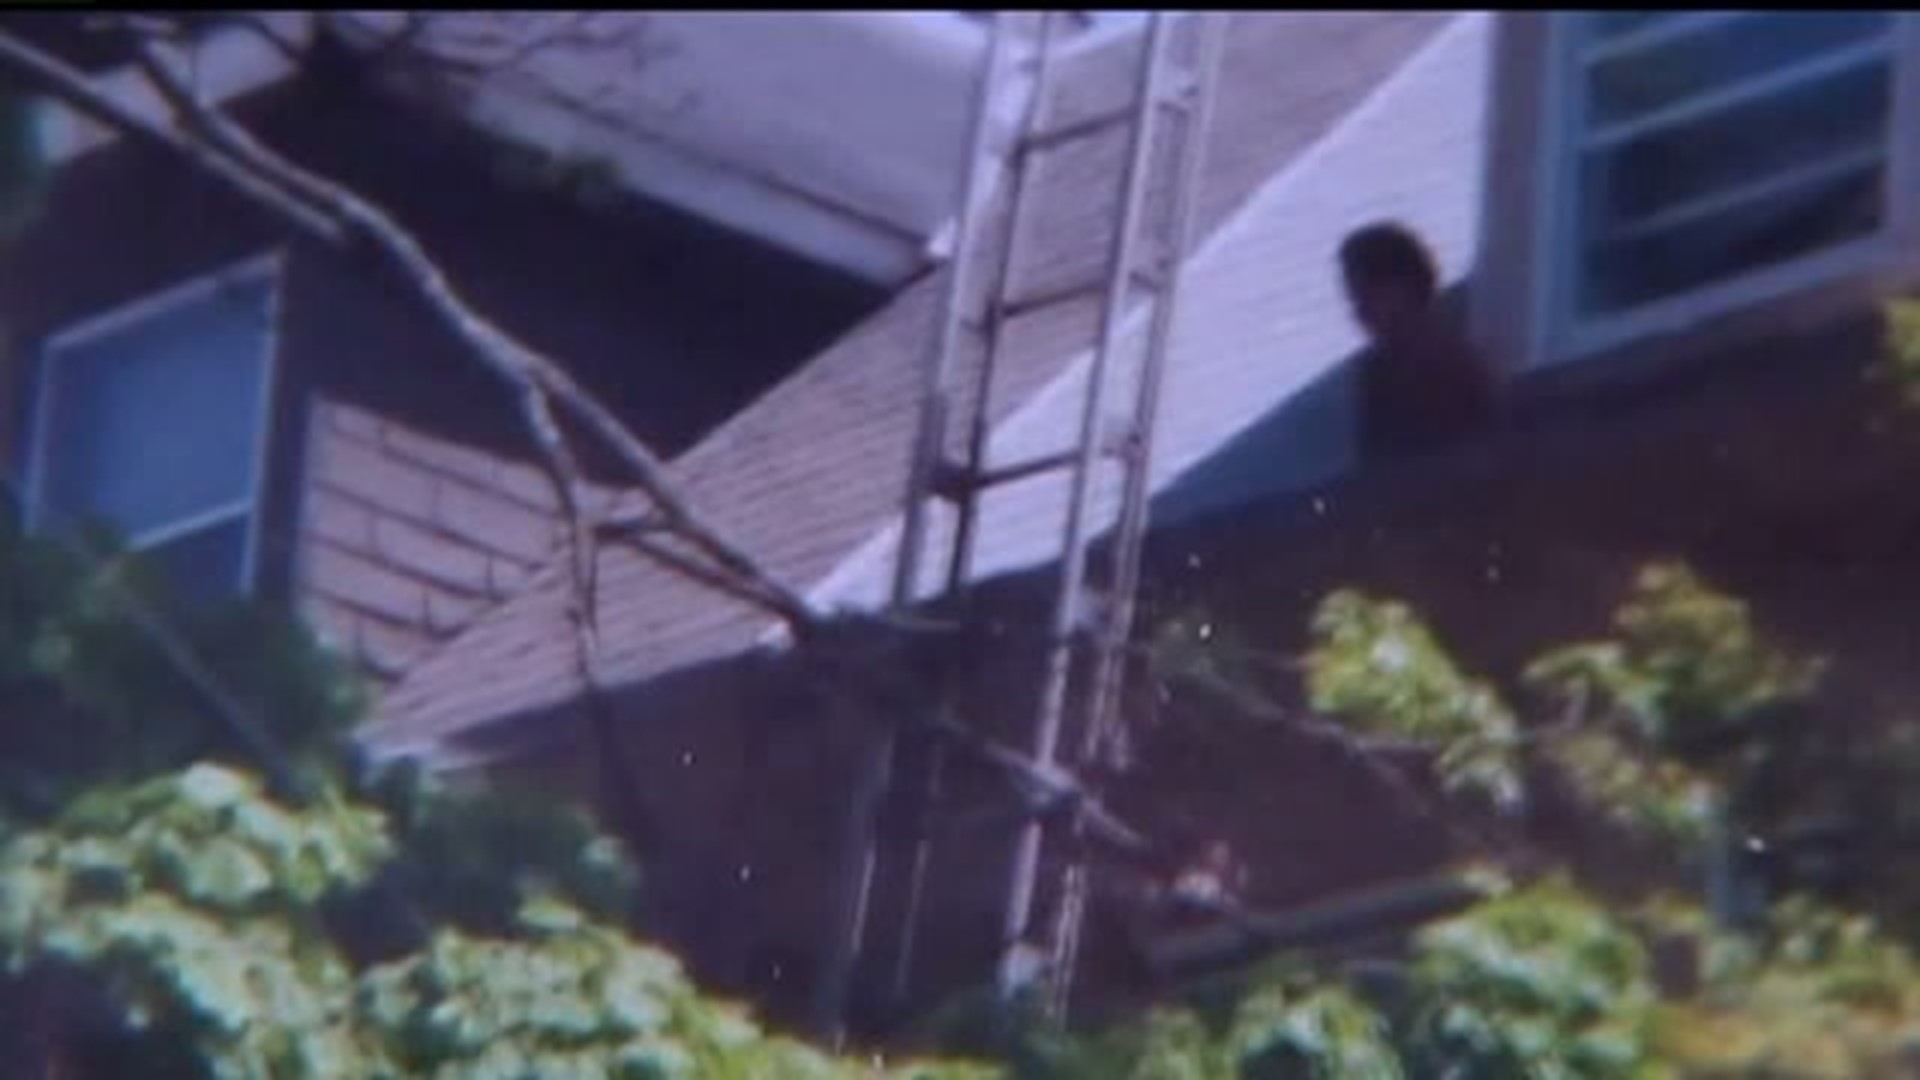 Philadelphia police rescue toddler from roof of a 3-story home